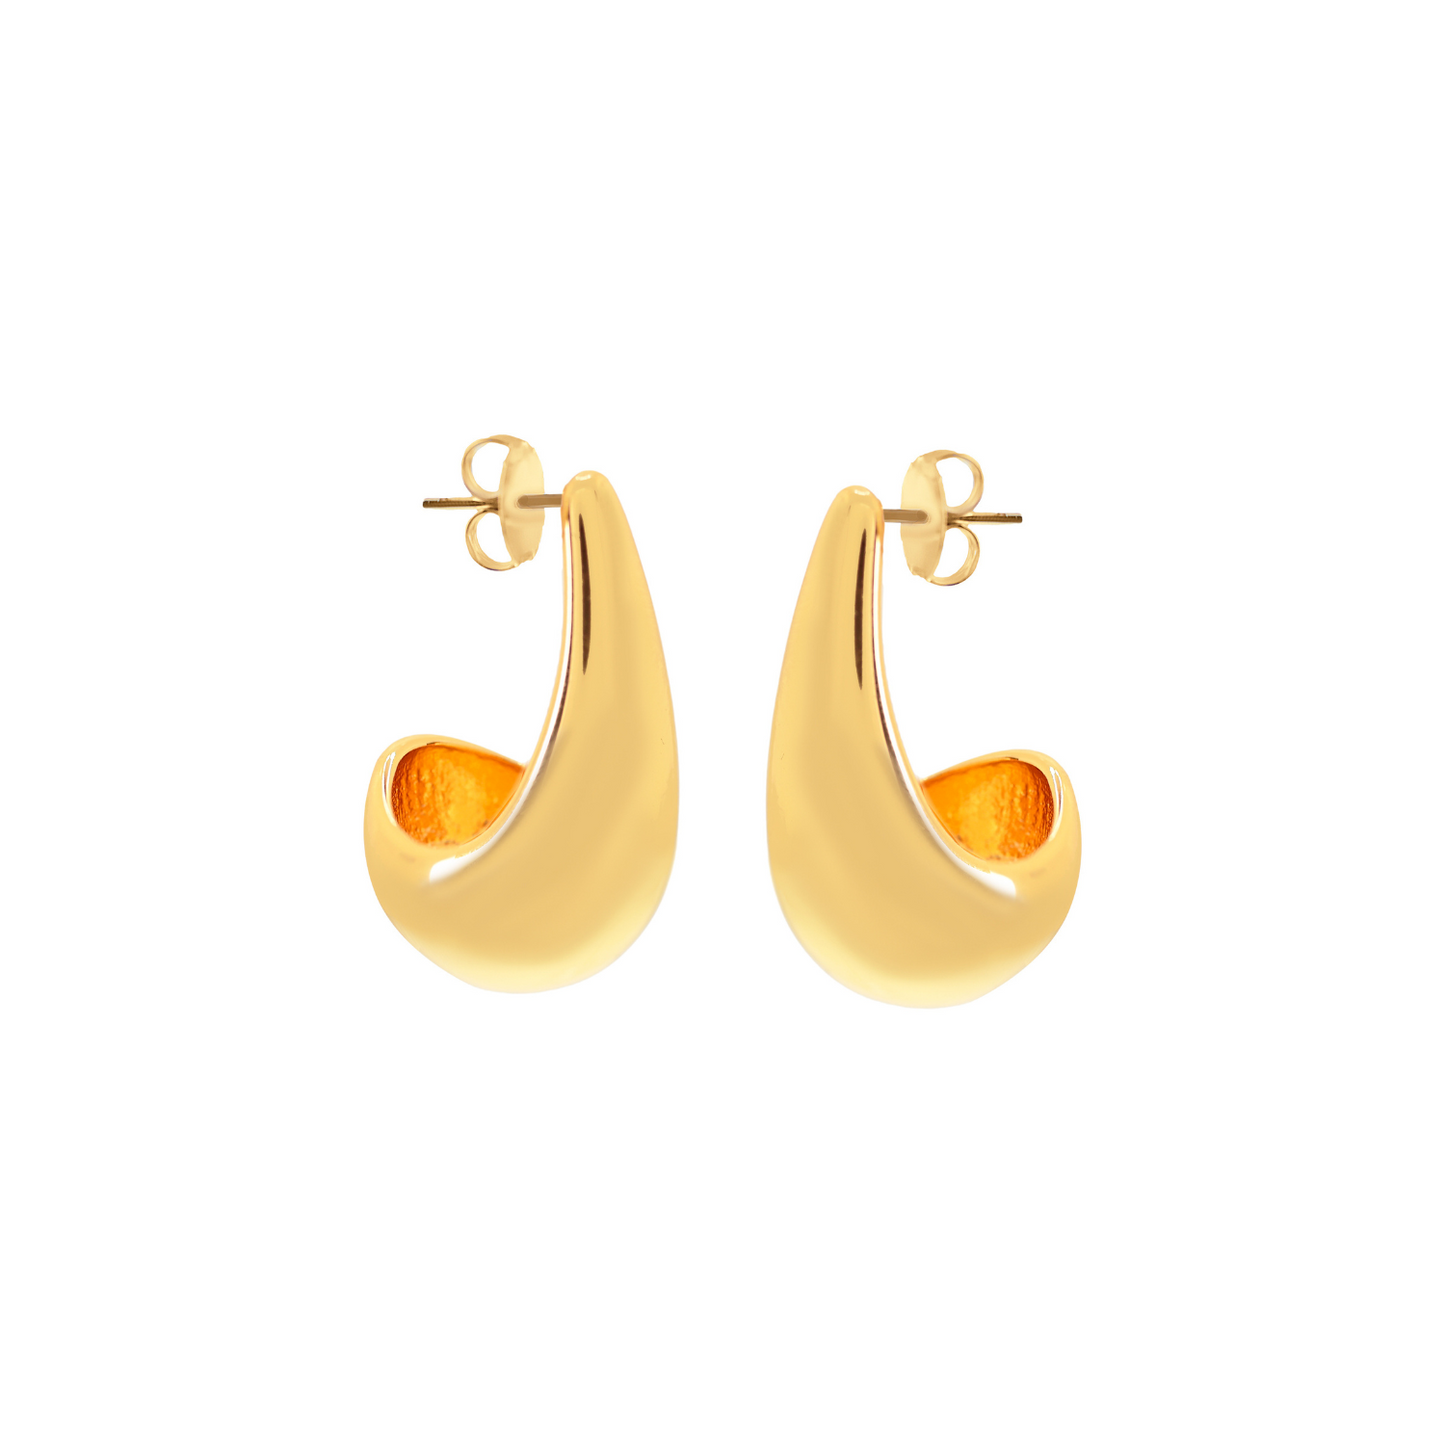 Pensive Gold Earring - Small